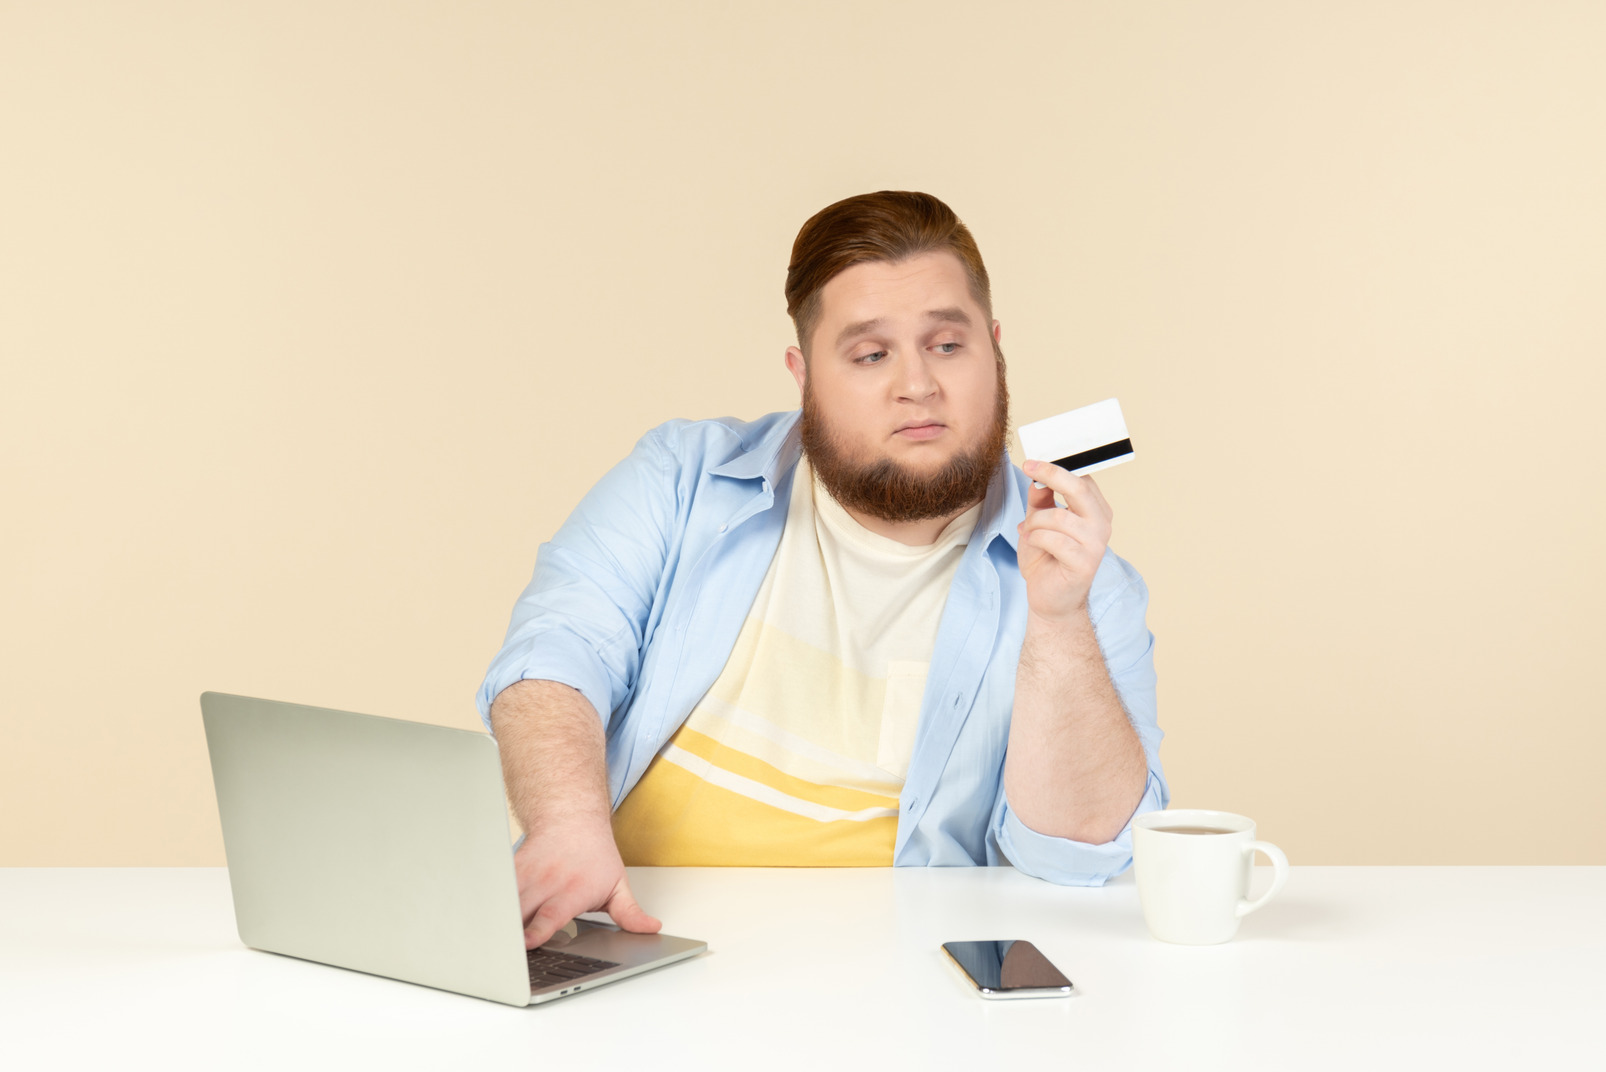 Sad looking young overweight man sitting at the table and looking at bank card